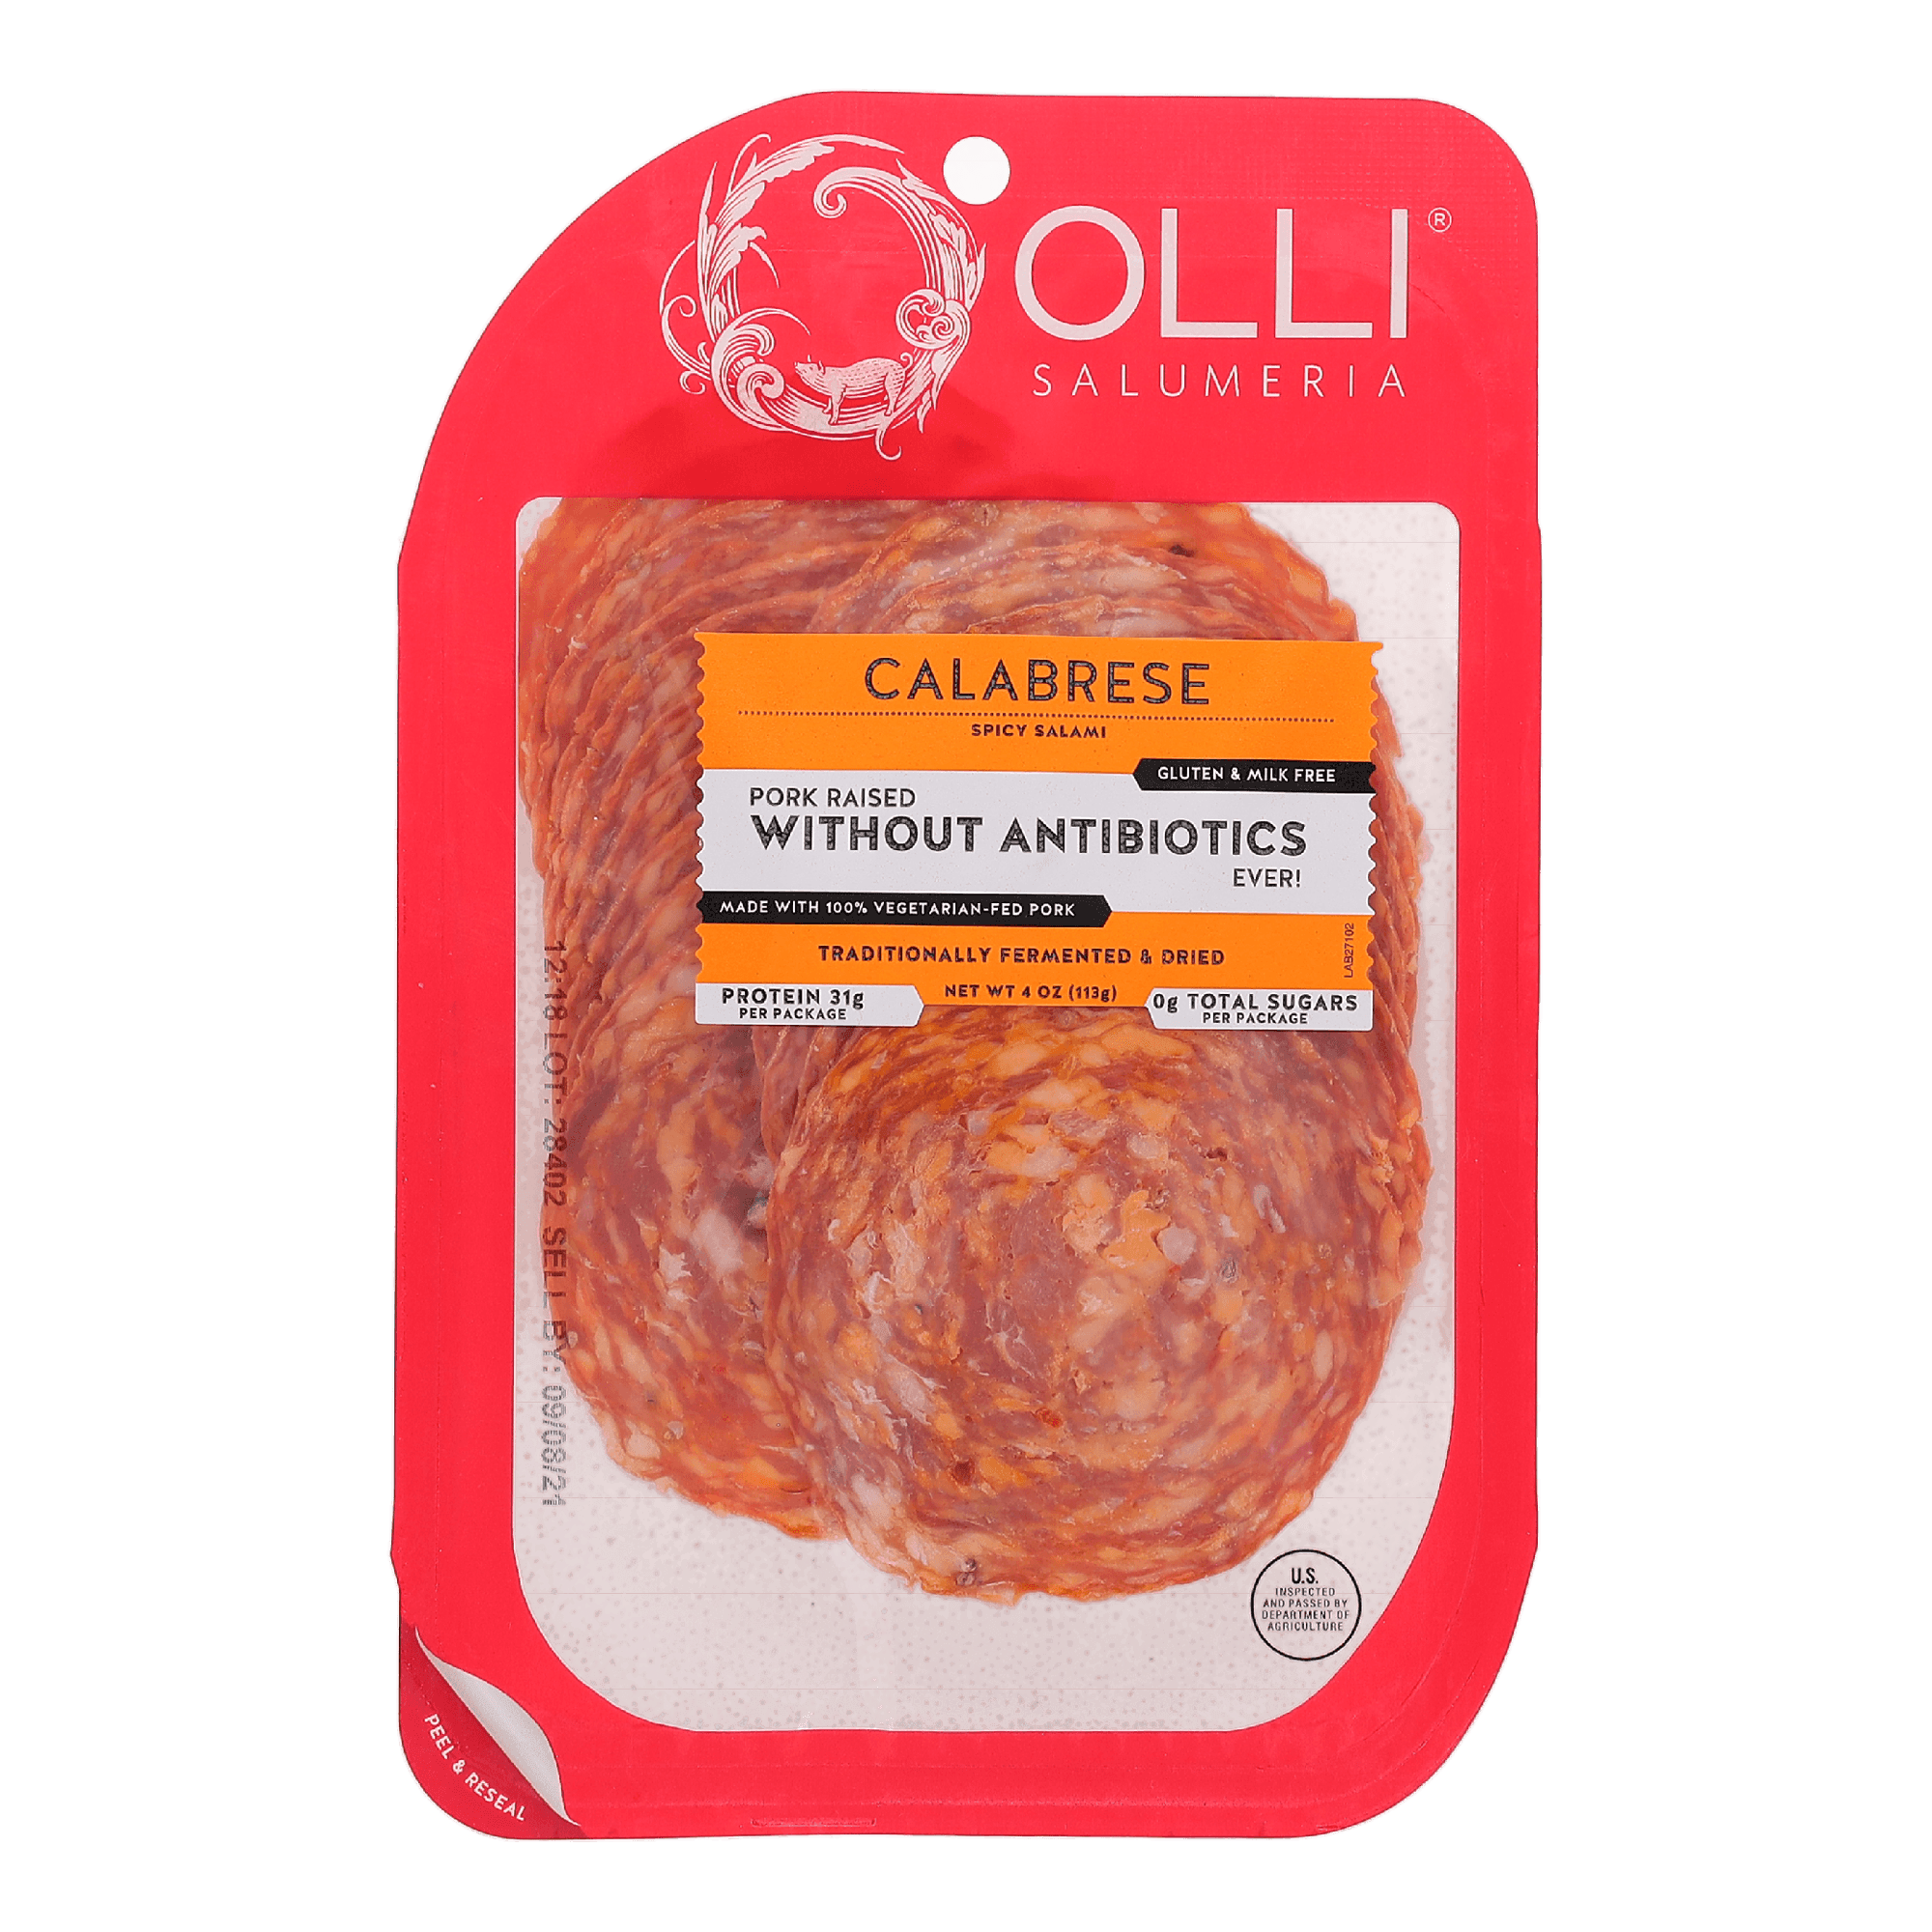 Calabrese Sliced - Savory Gourmet